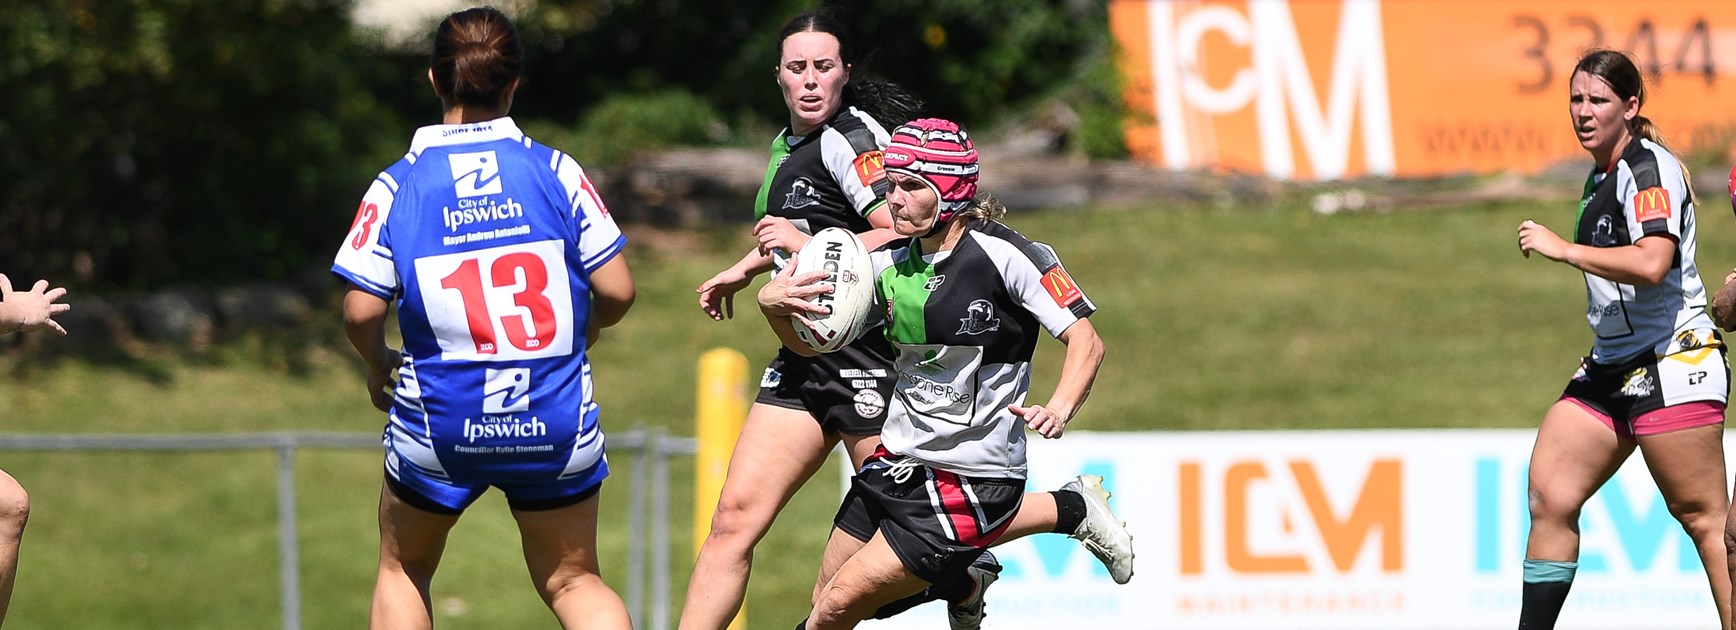 Teresa Anderson of Souths with the ball. Photo: Vanessa Hafner / QRL Media 